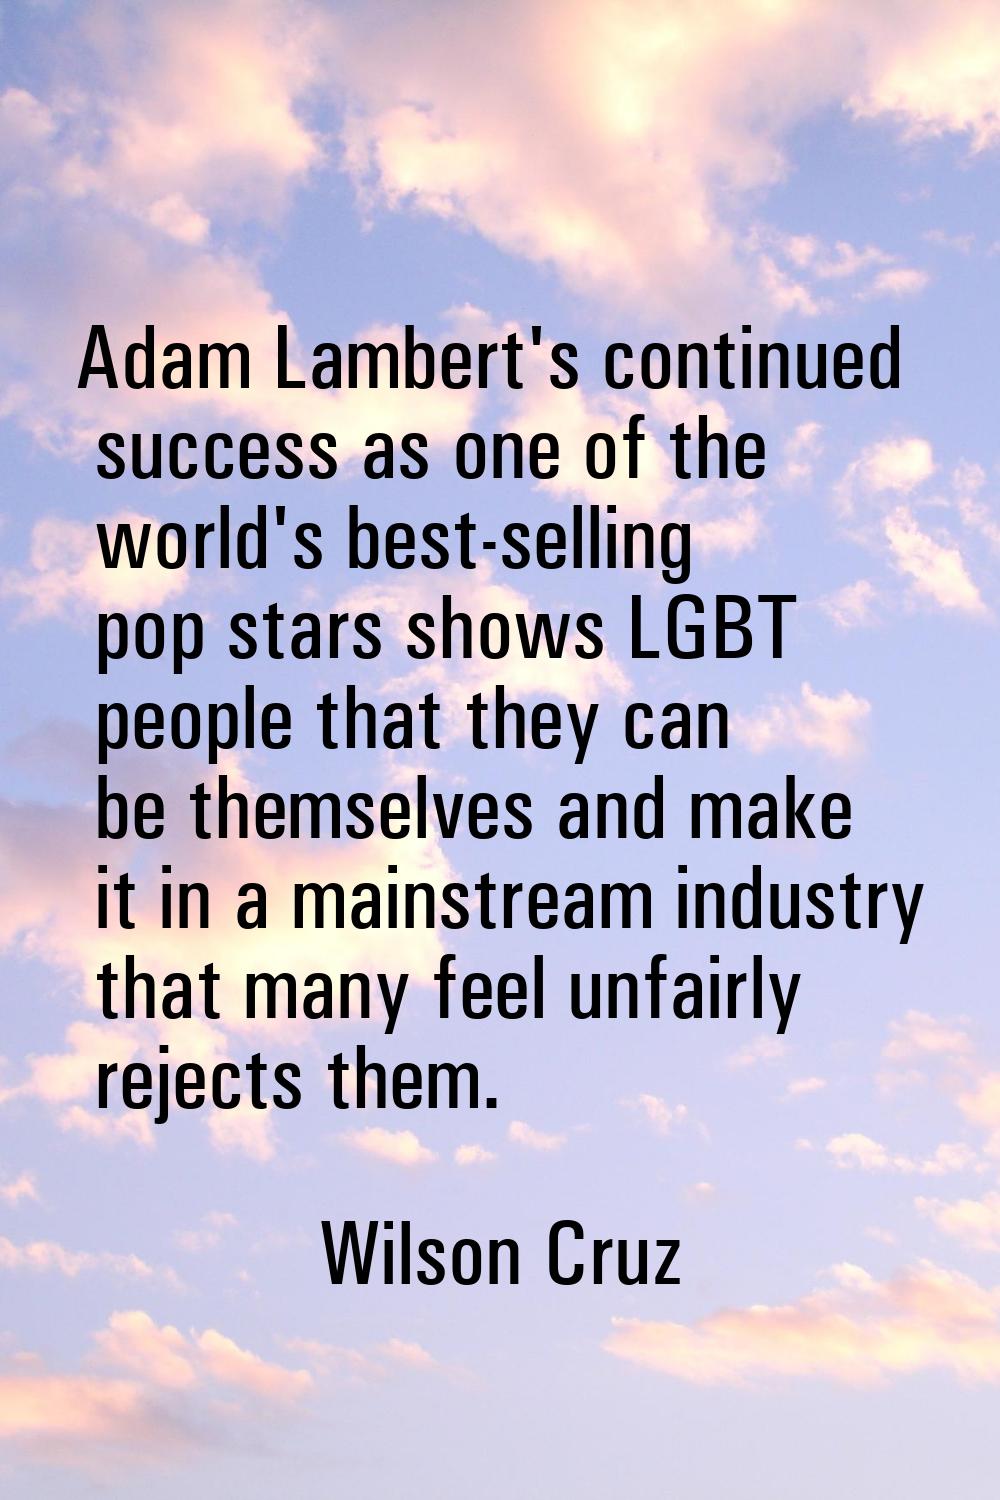 Adam Lambert's continued success as one of the world's best-selling pop stars shows LGBT people tha